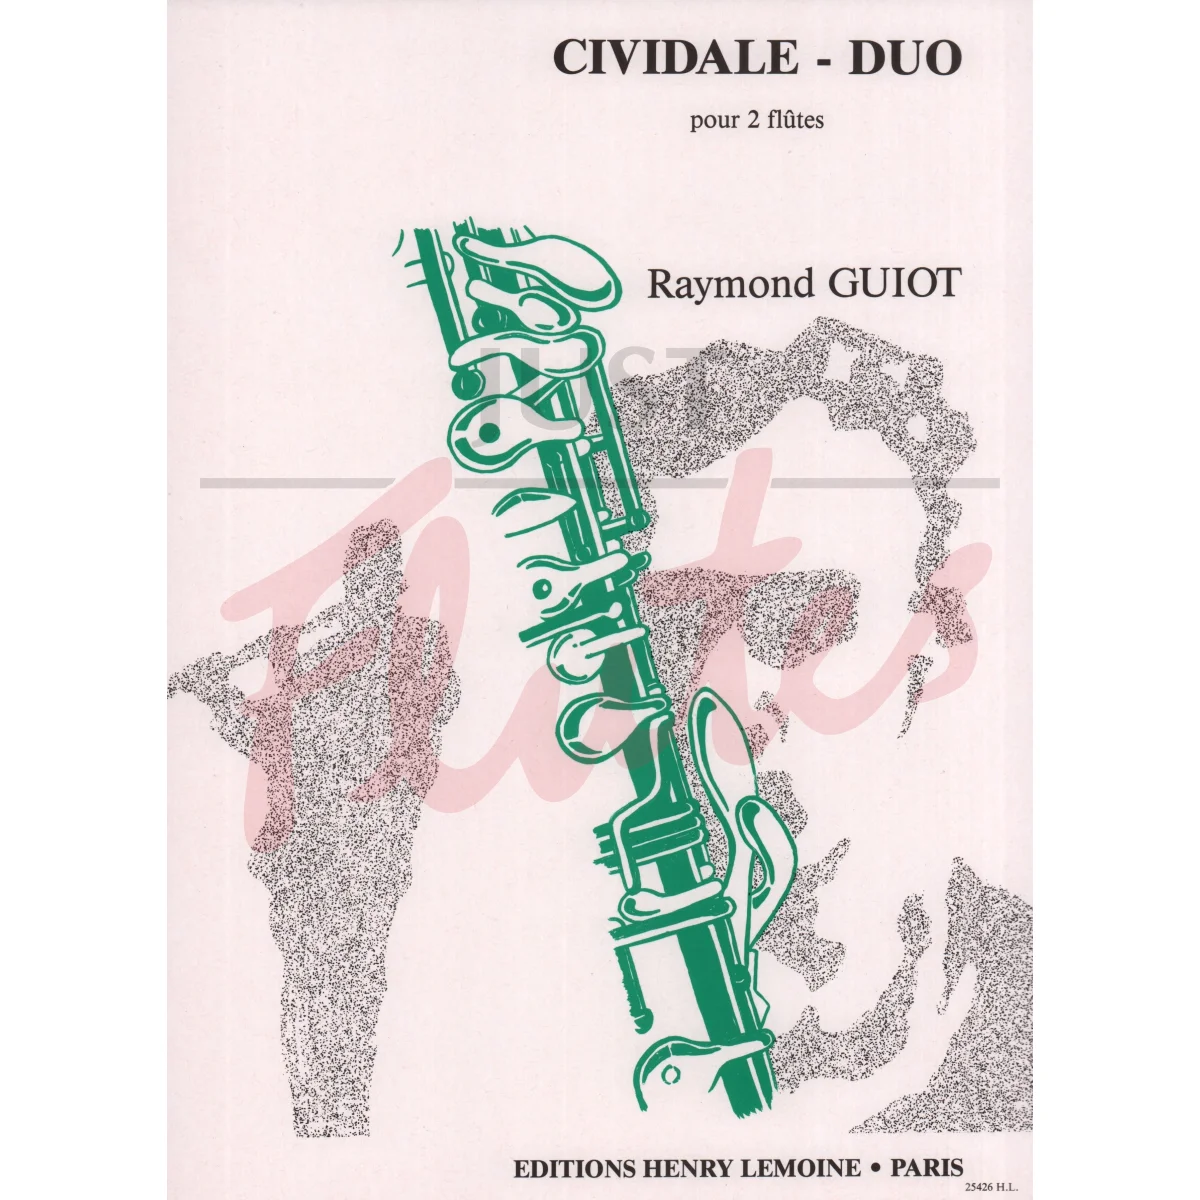 Cividale-Duo for Two Flutes